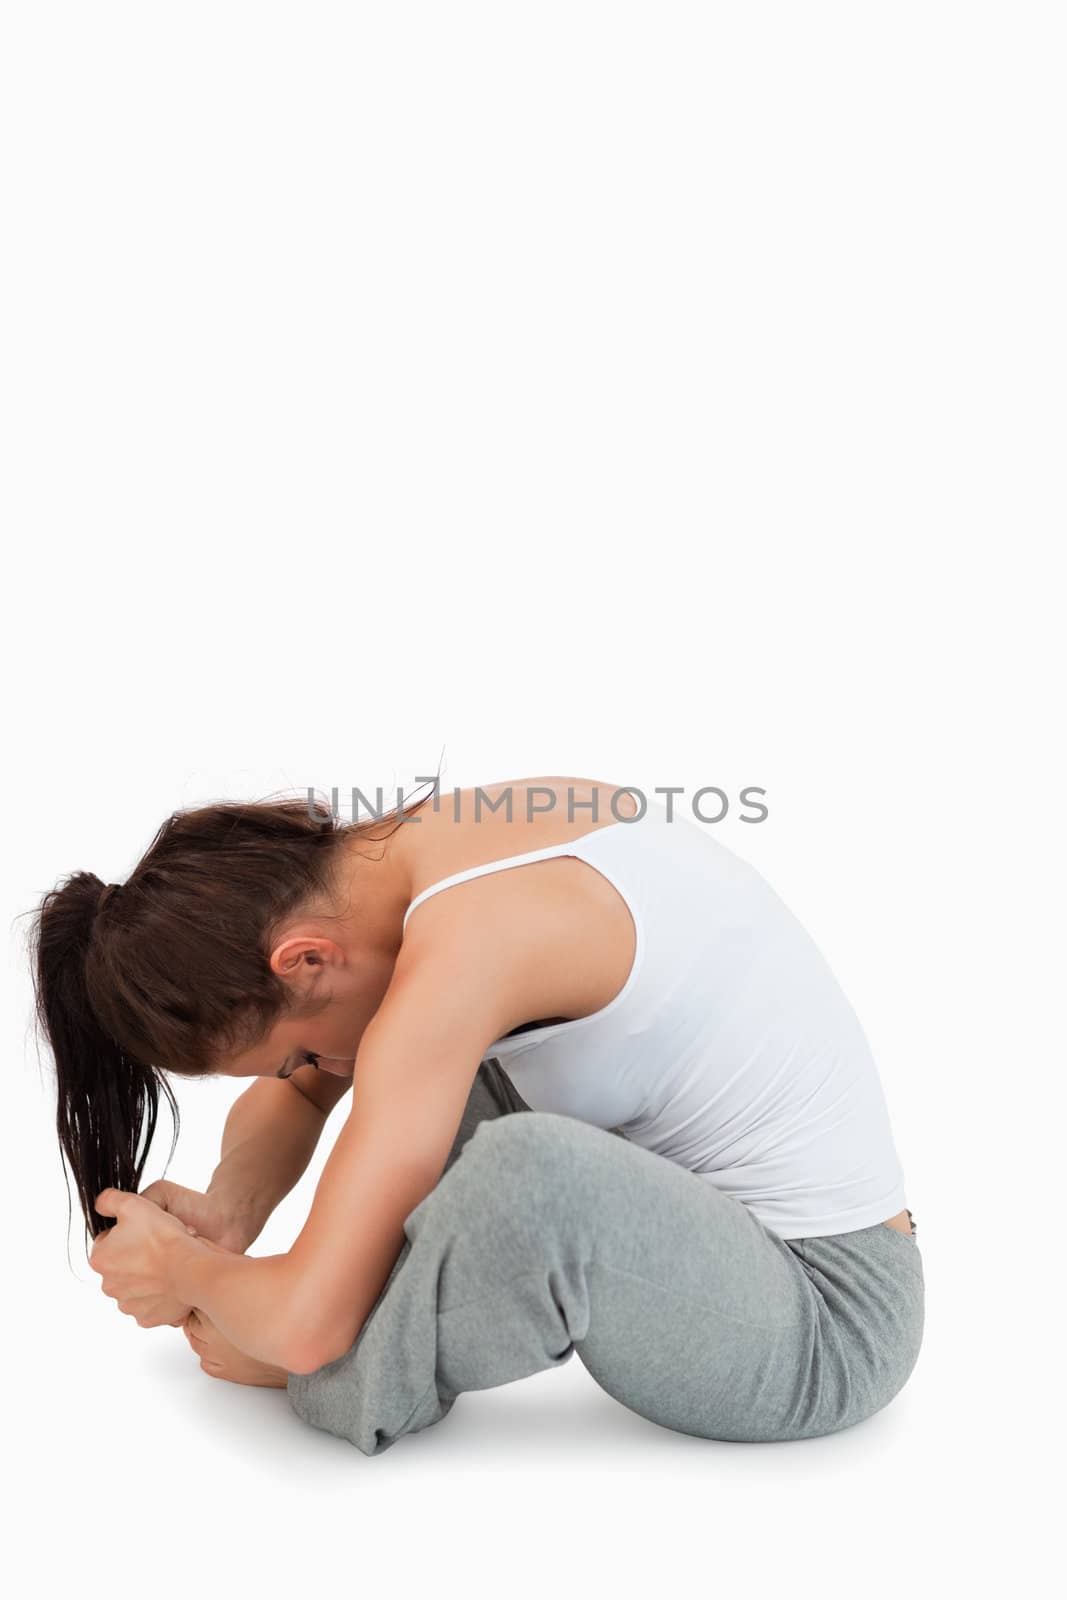 Portrait of a woman stretching her legs against a white background